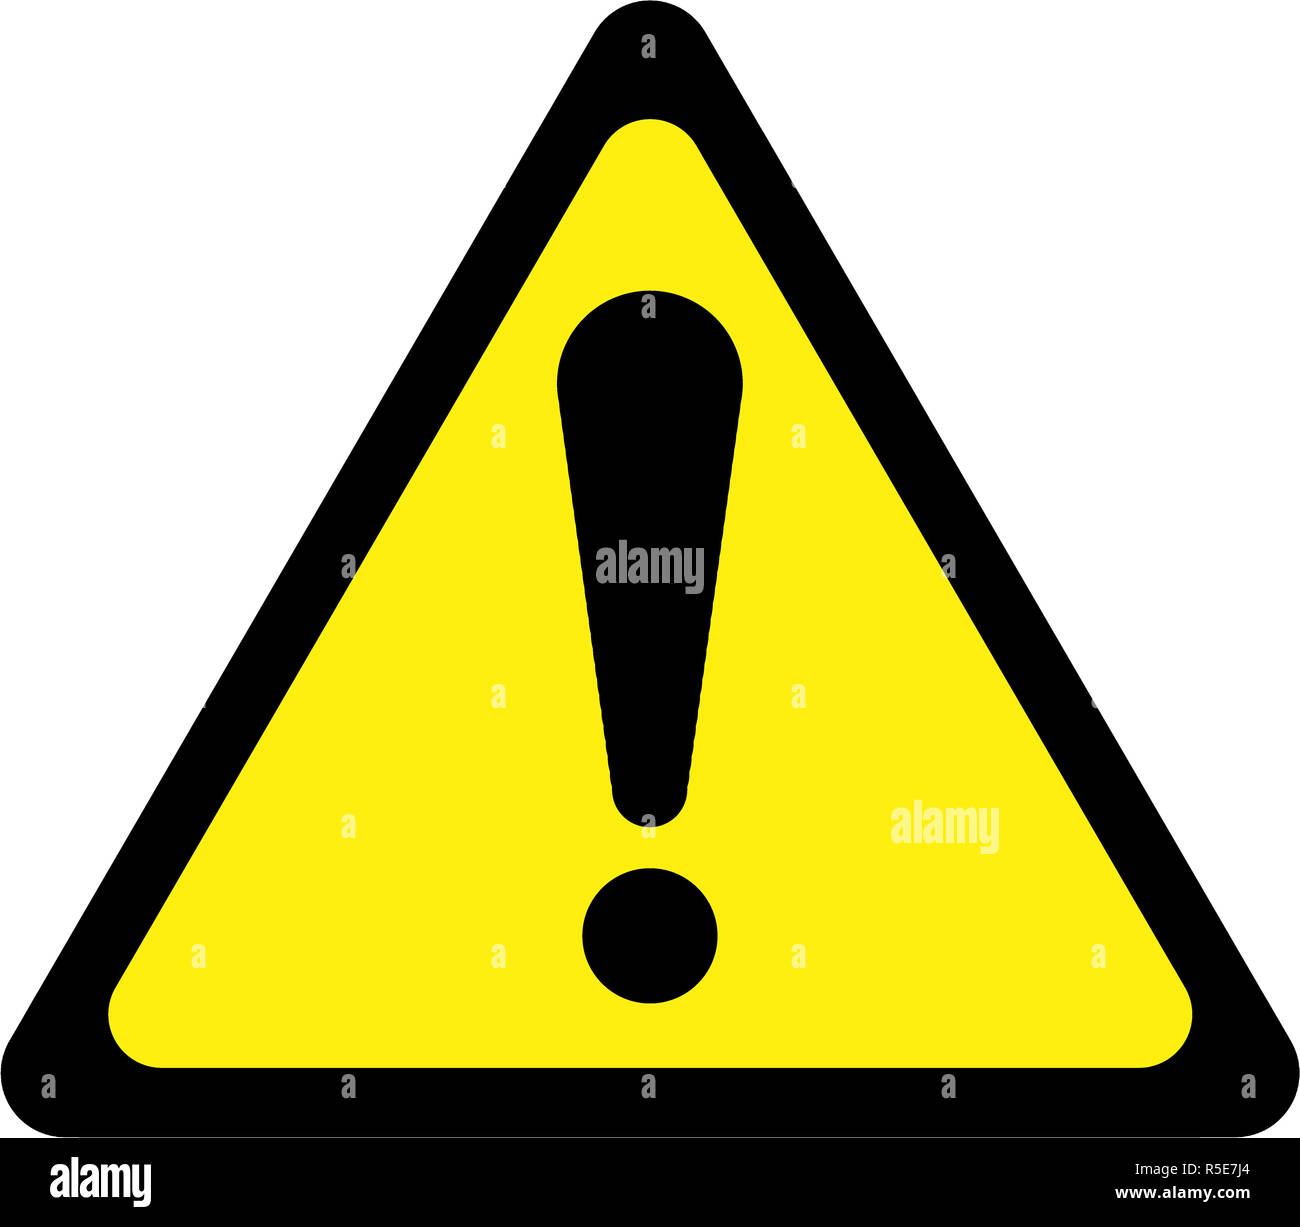 Yellow warning sign with exclamation mark symbol Stock Photo - Alamy